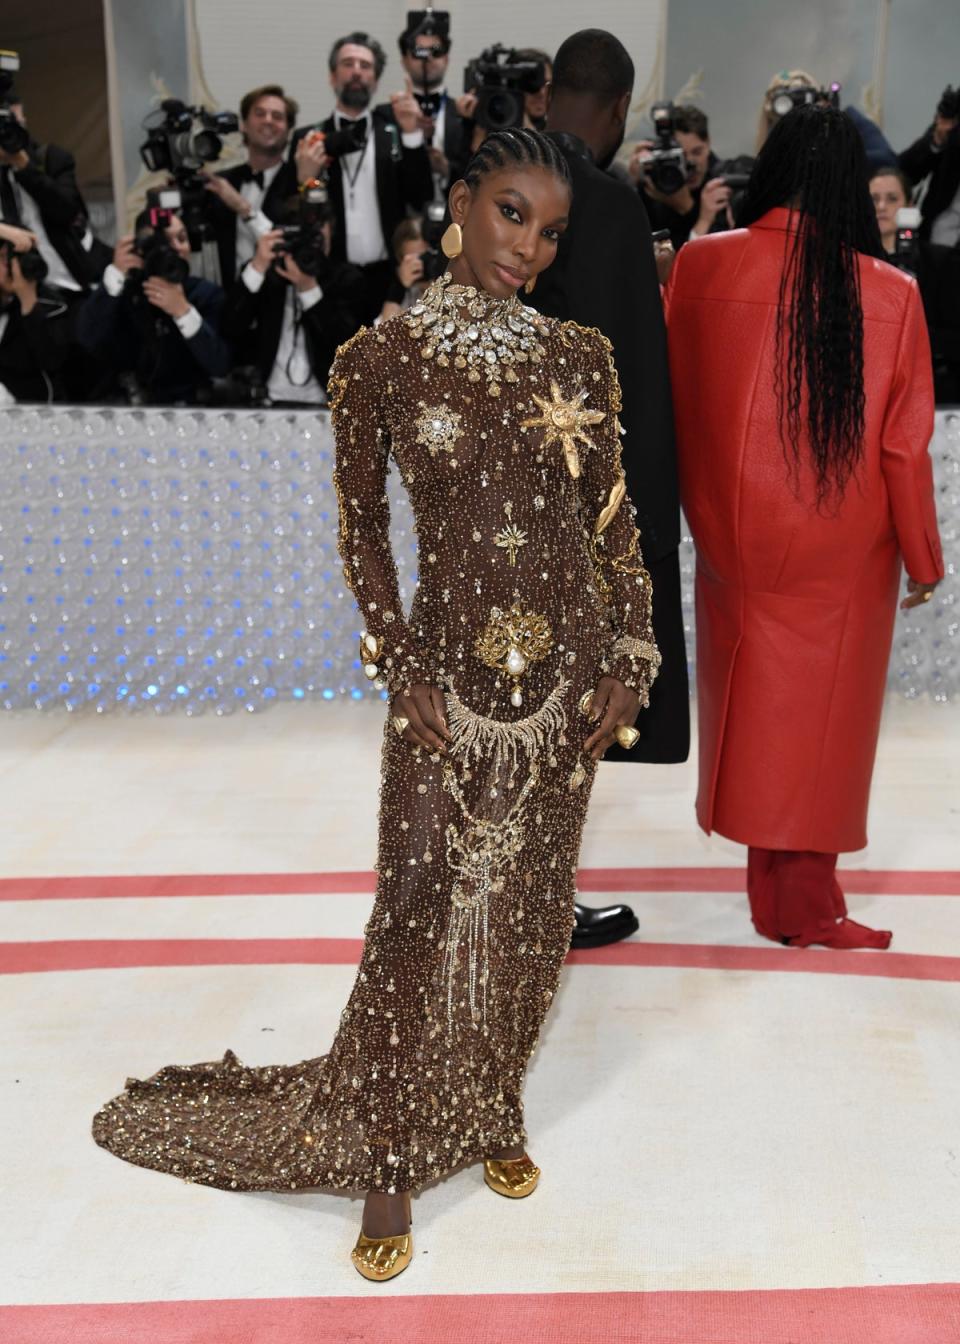 Michaela Coel, pictured at the Met Gala, has spoken out for women’s rights (Evan Agostini/Invision/AP)